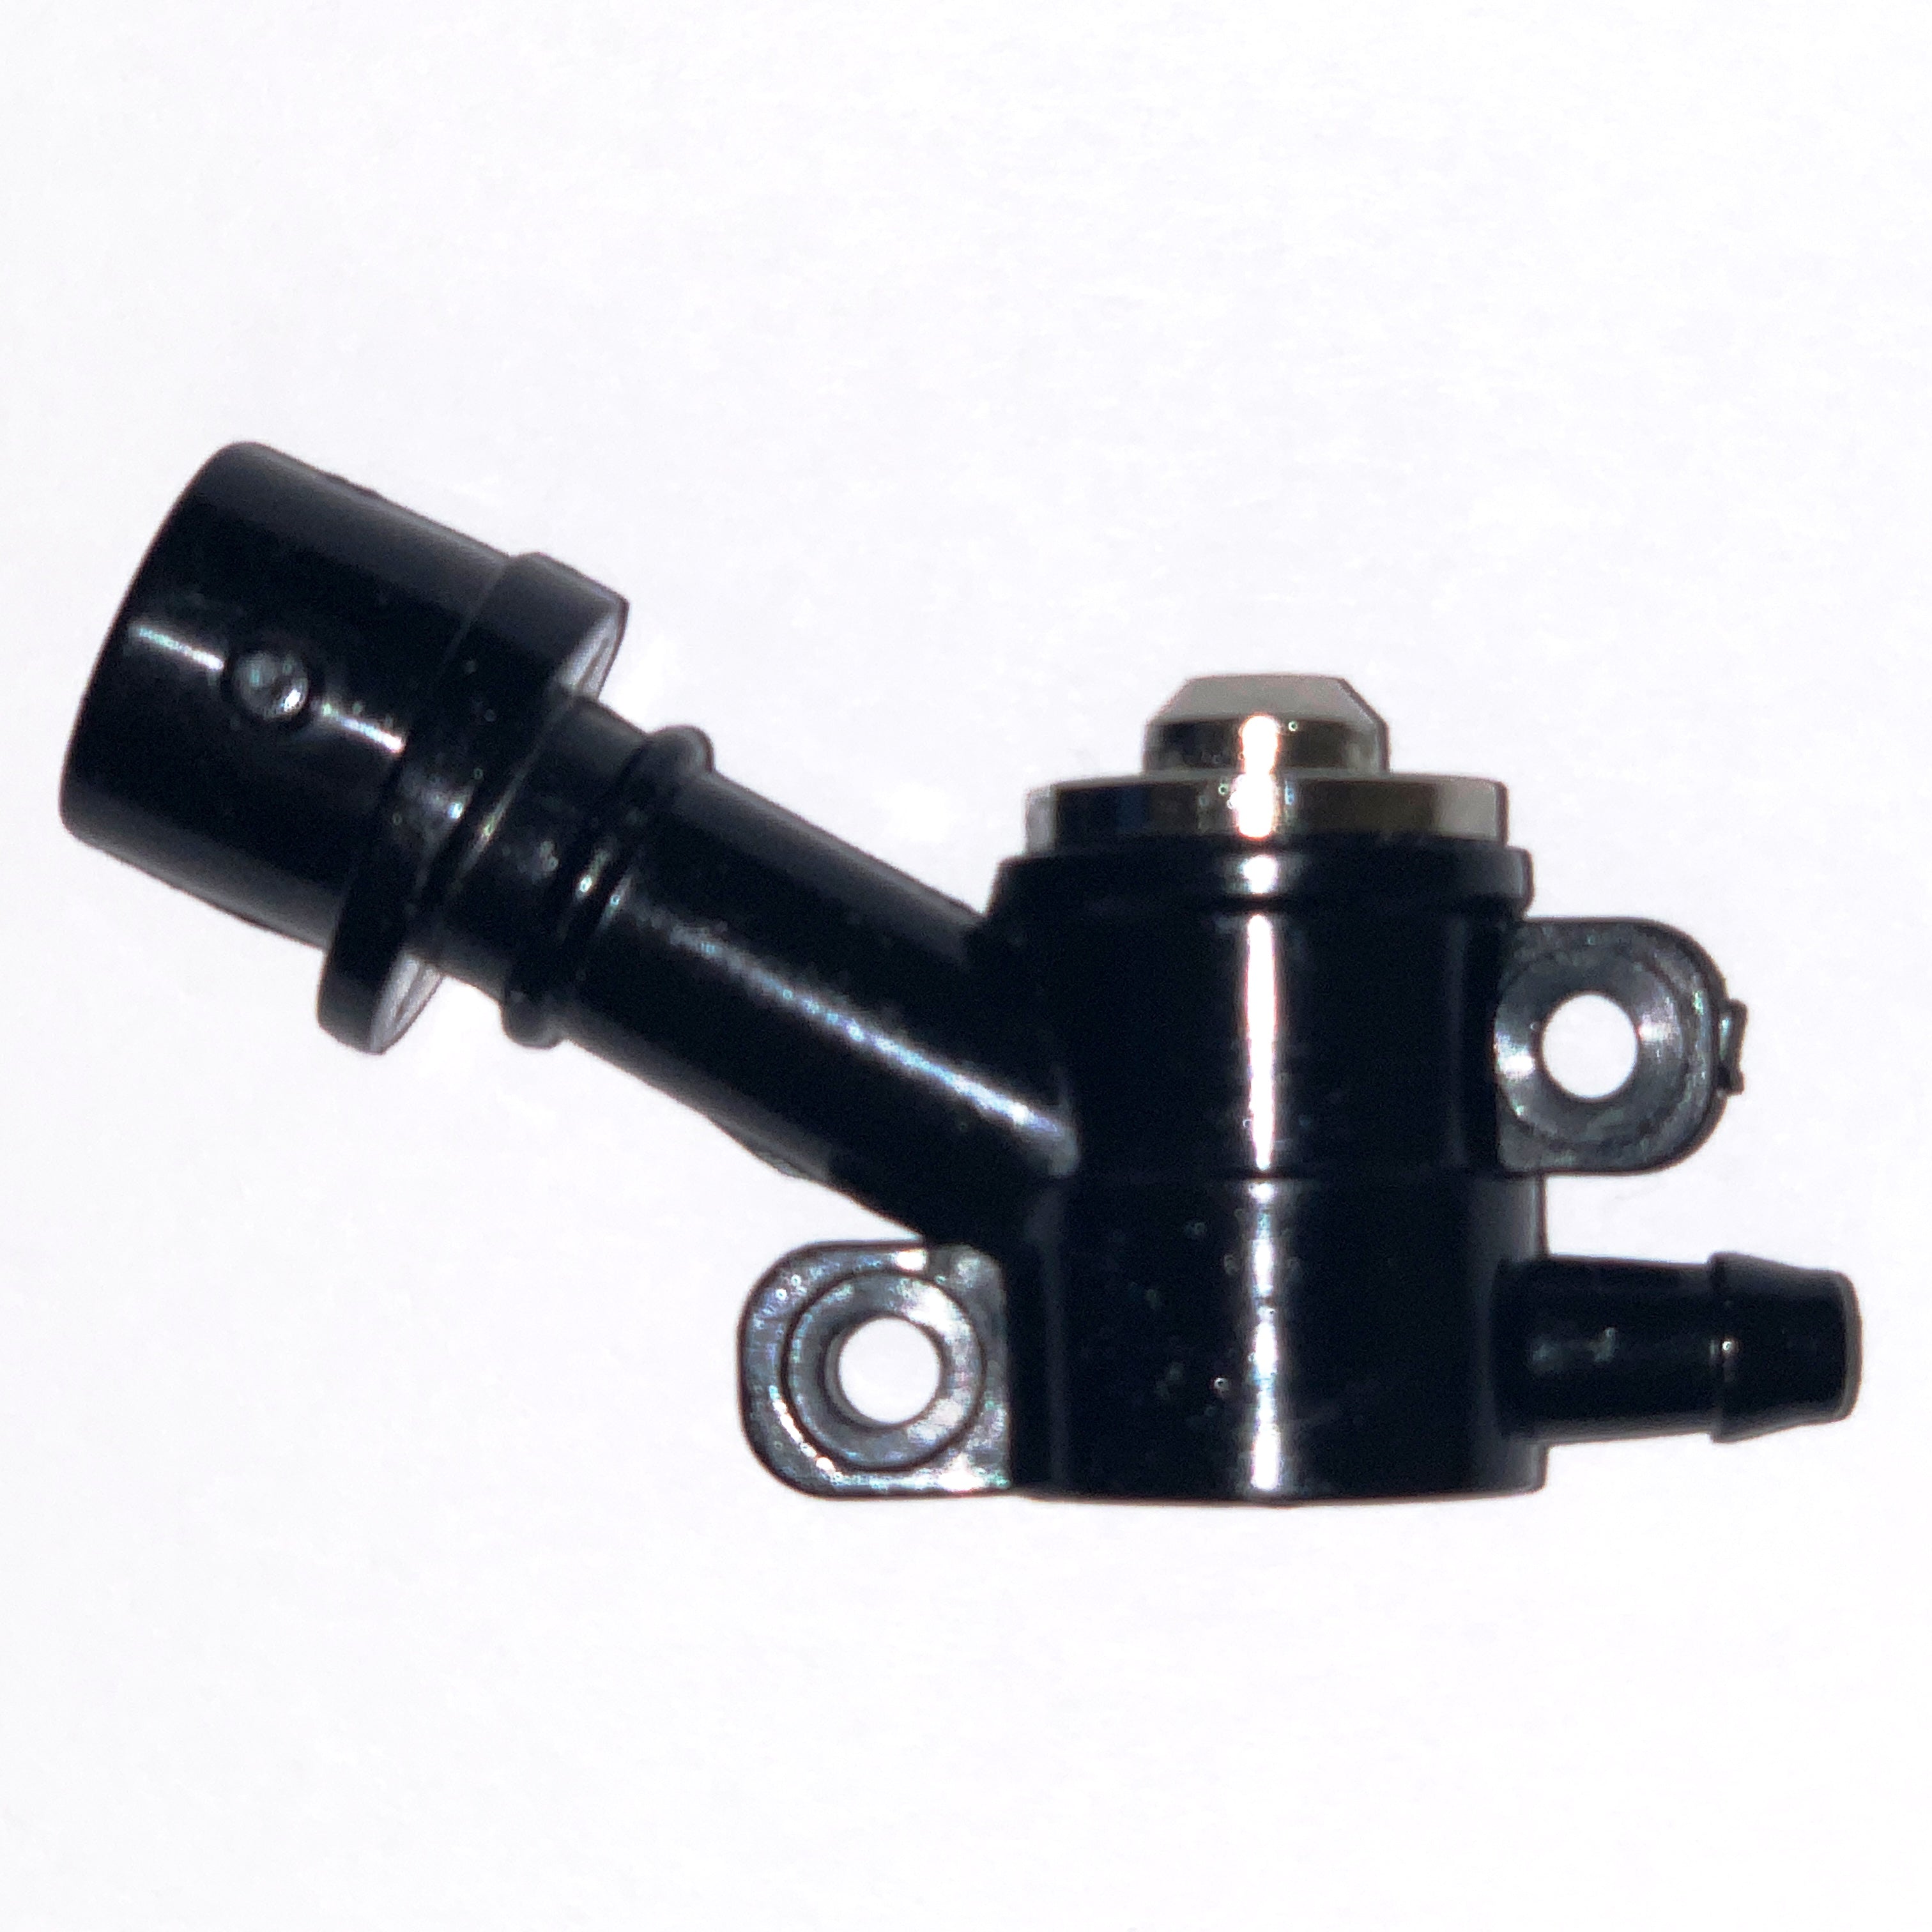 Replacement Water Flow Valve for Trigger of Aqua Pro Vac